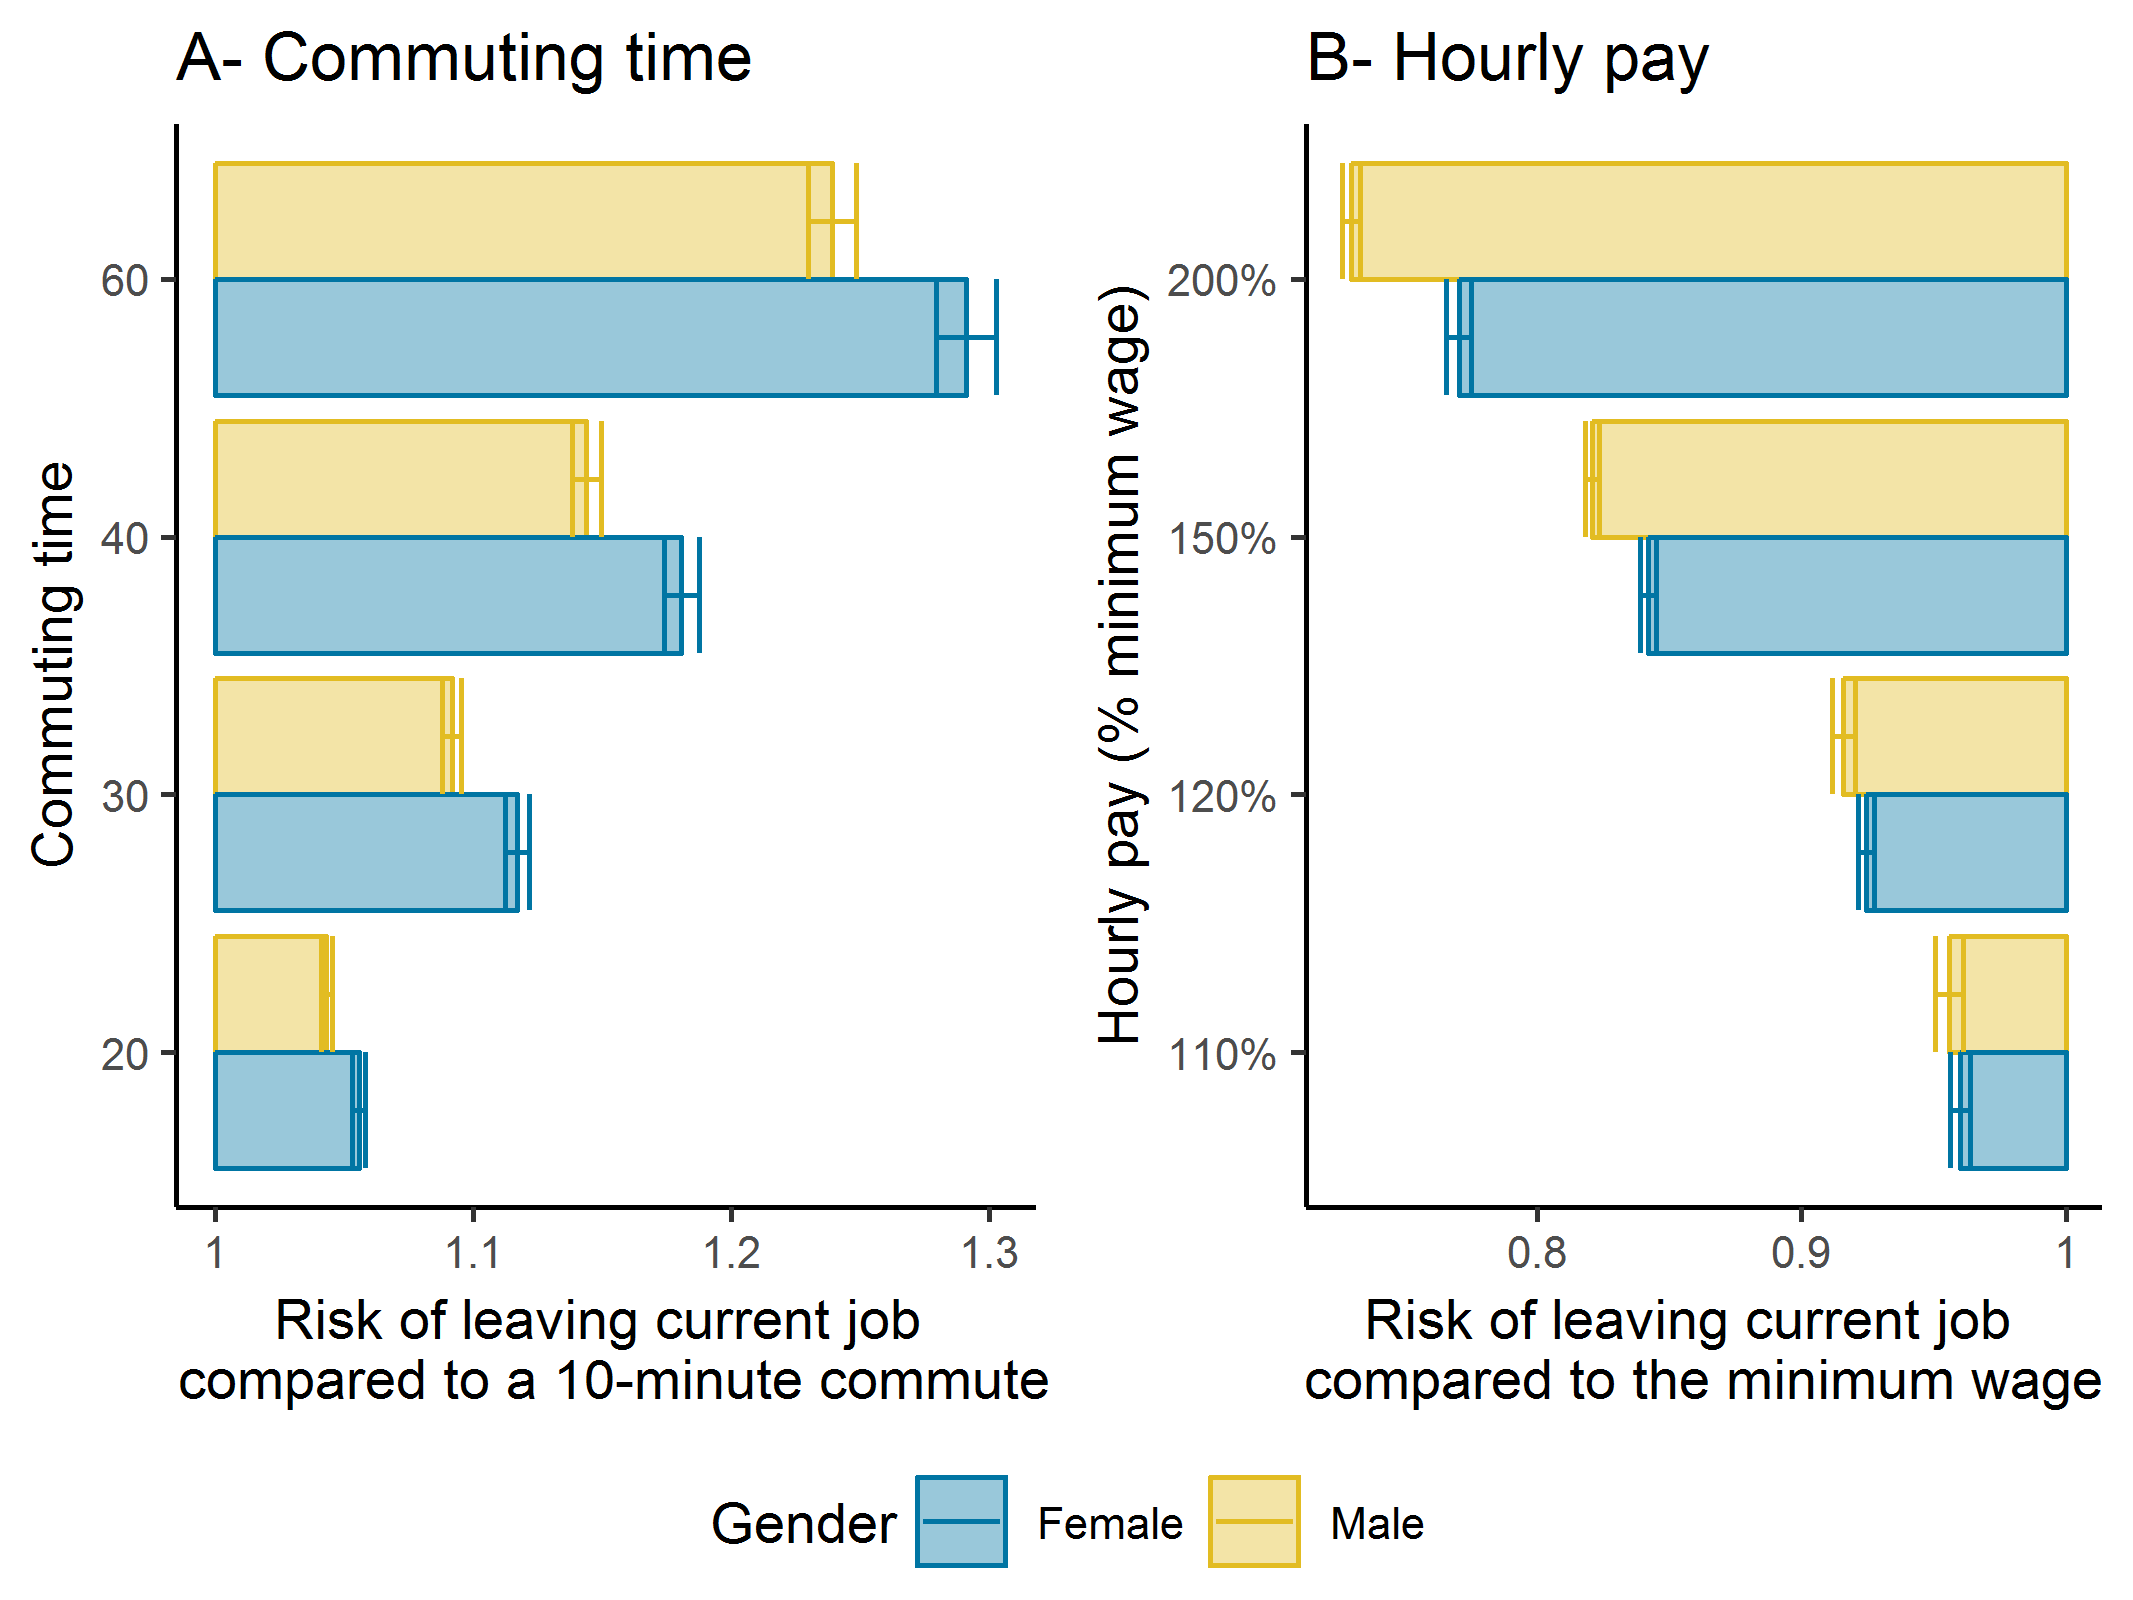 Women’s decisions to leave their jobs are more affected by length of commute than men.